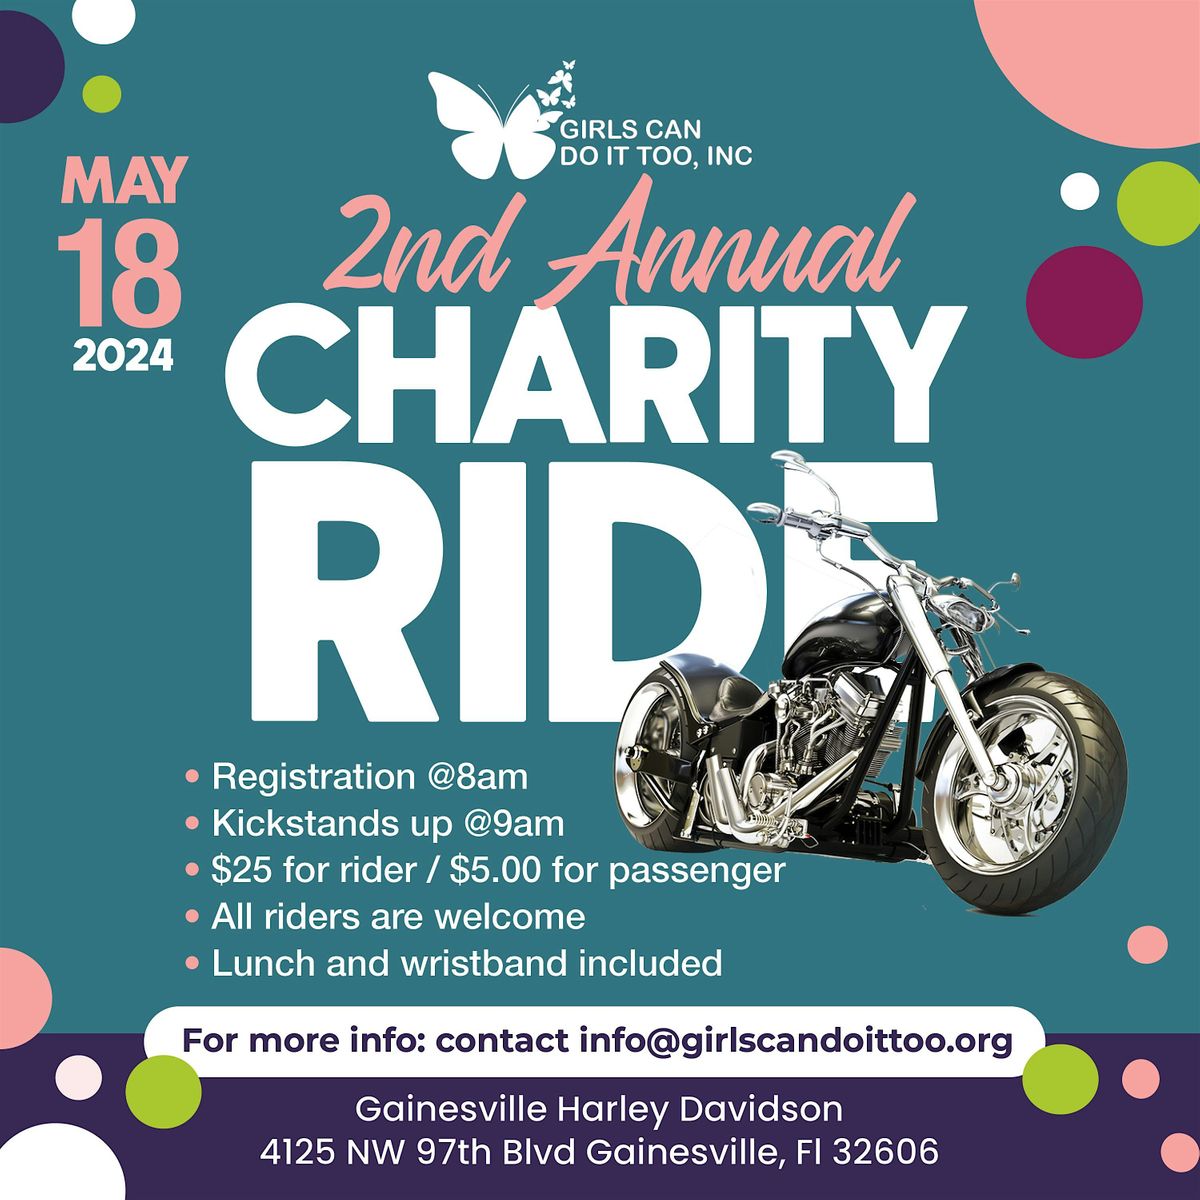 2nd Annual Girls Can Do IT Too Charity Ride